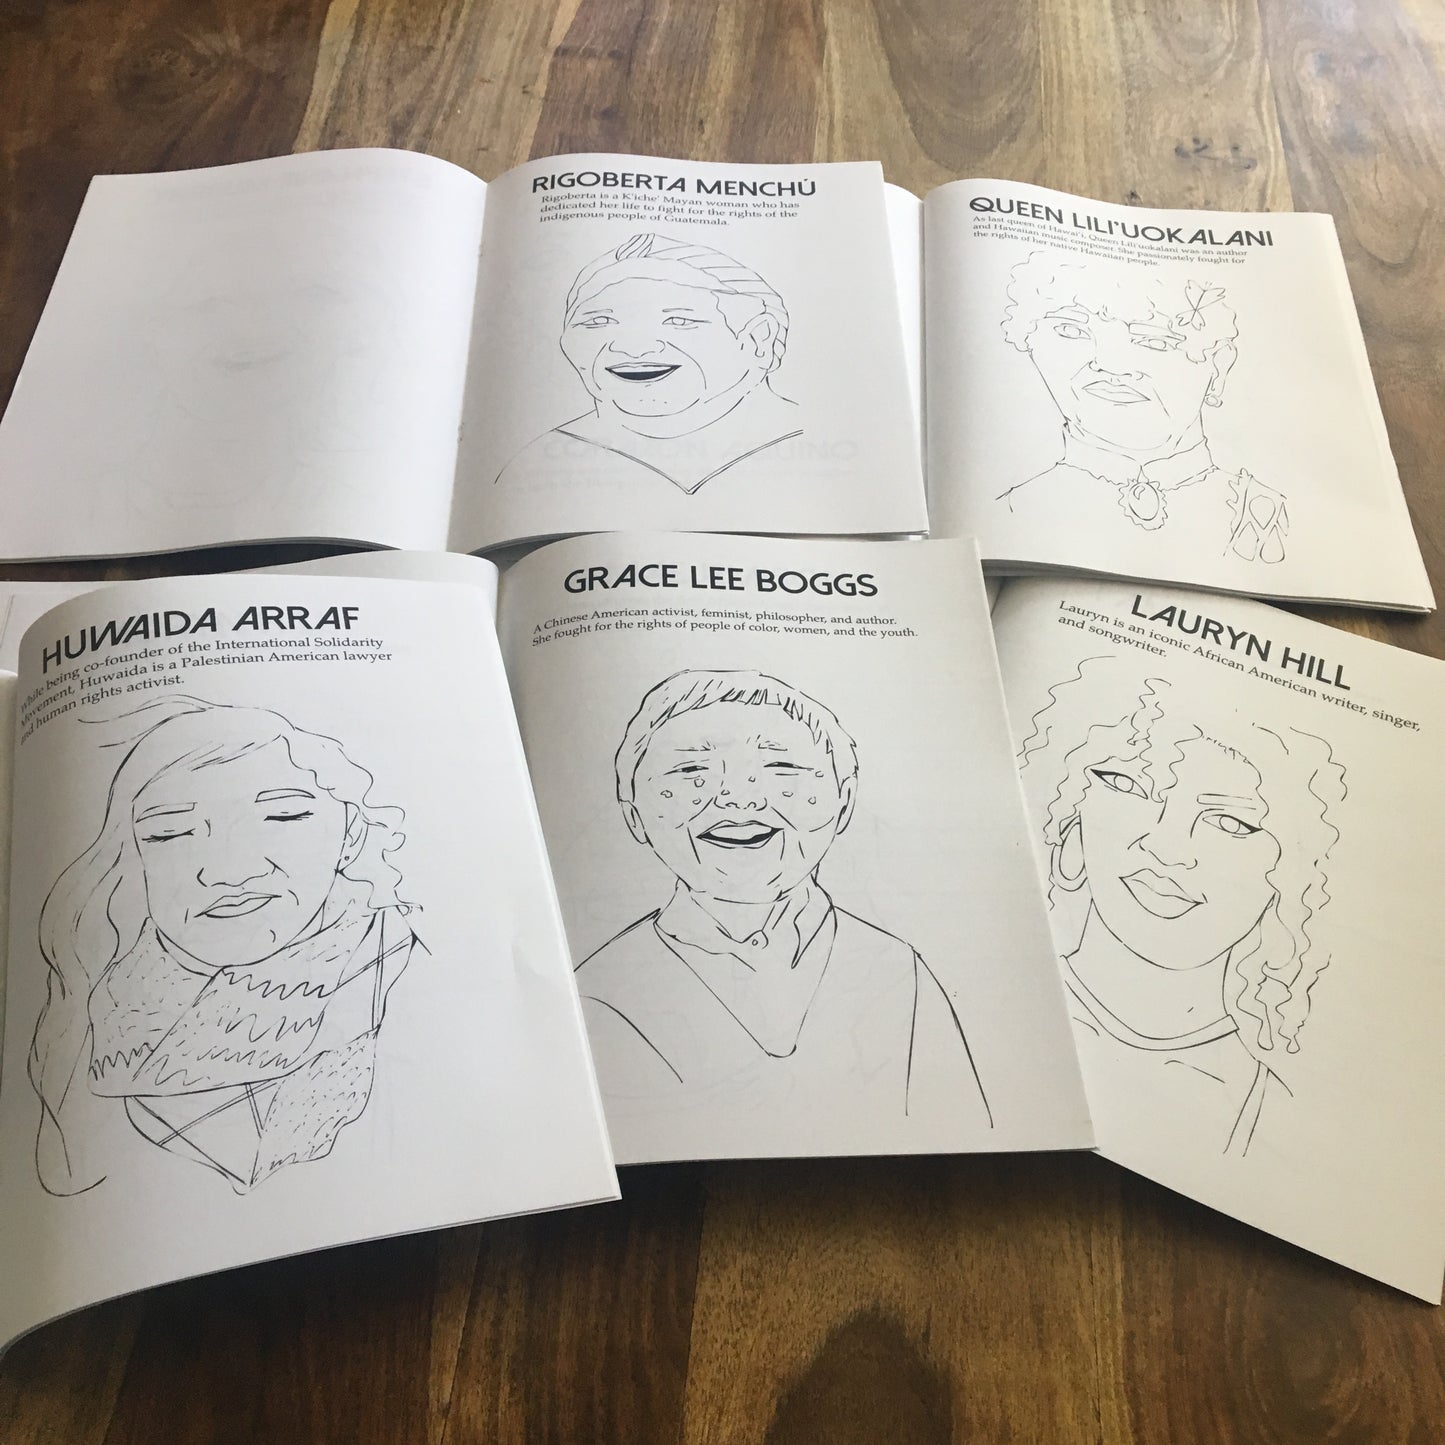 Color HerStory: Women of the World Coloring Book